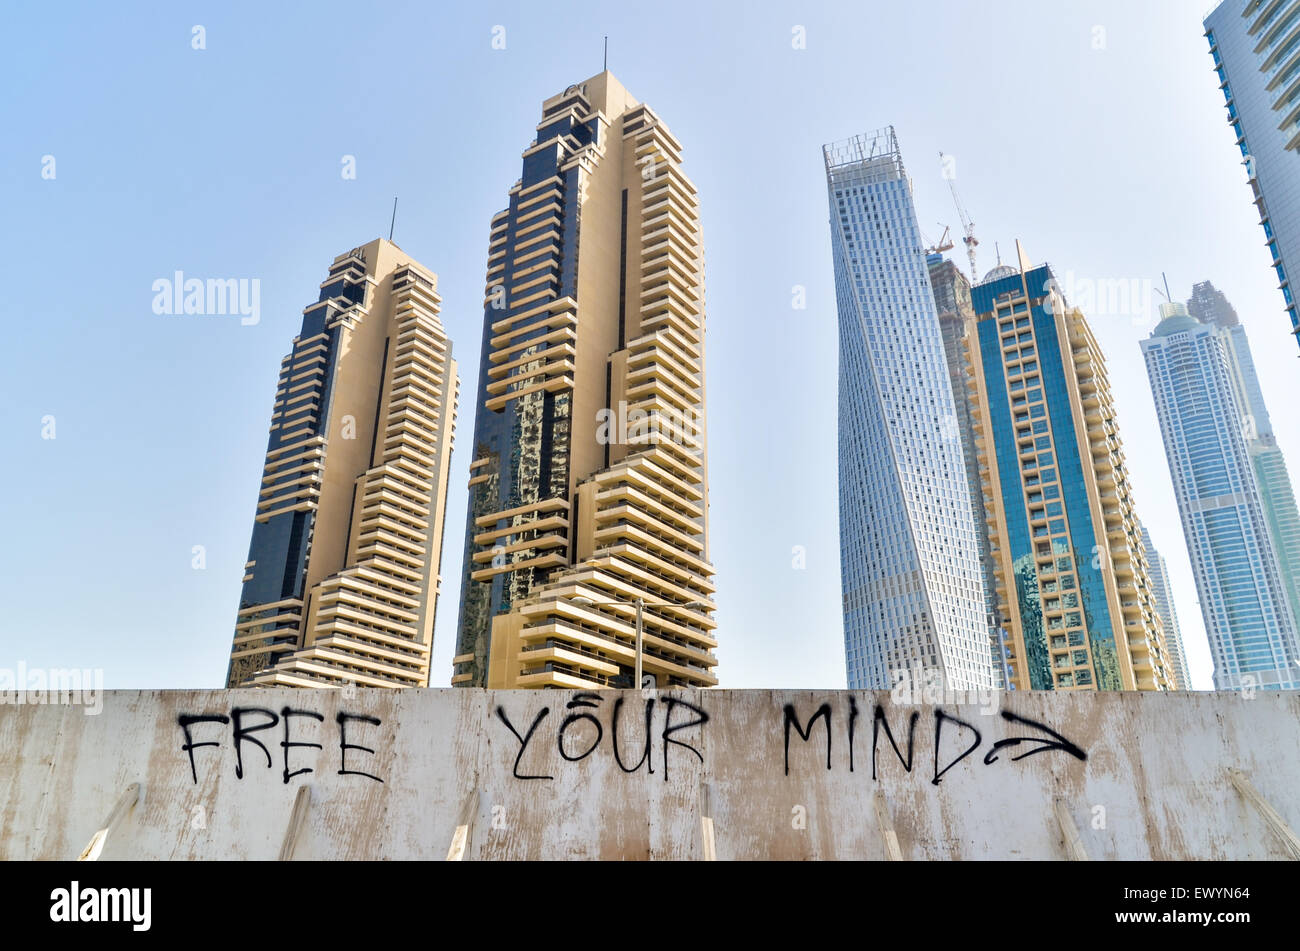 'Free your mind' written on a wall of a road in construction near the Dubai Marina, UAE Stock Photo